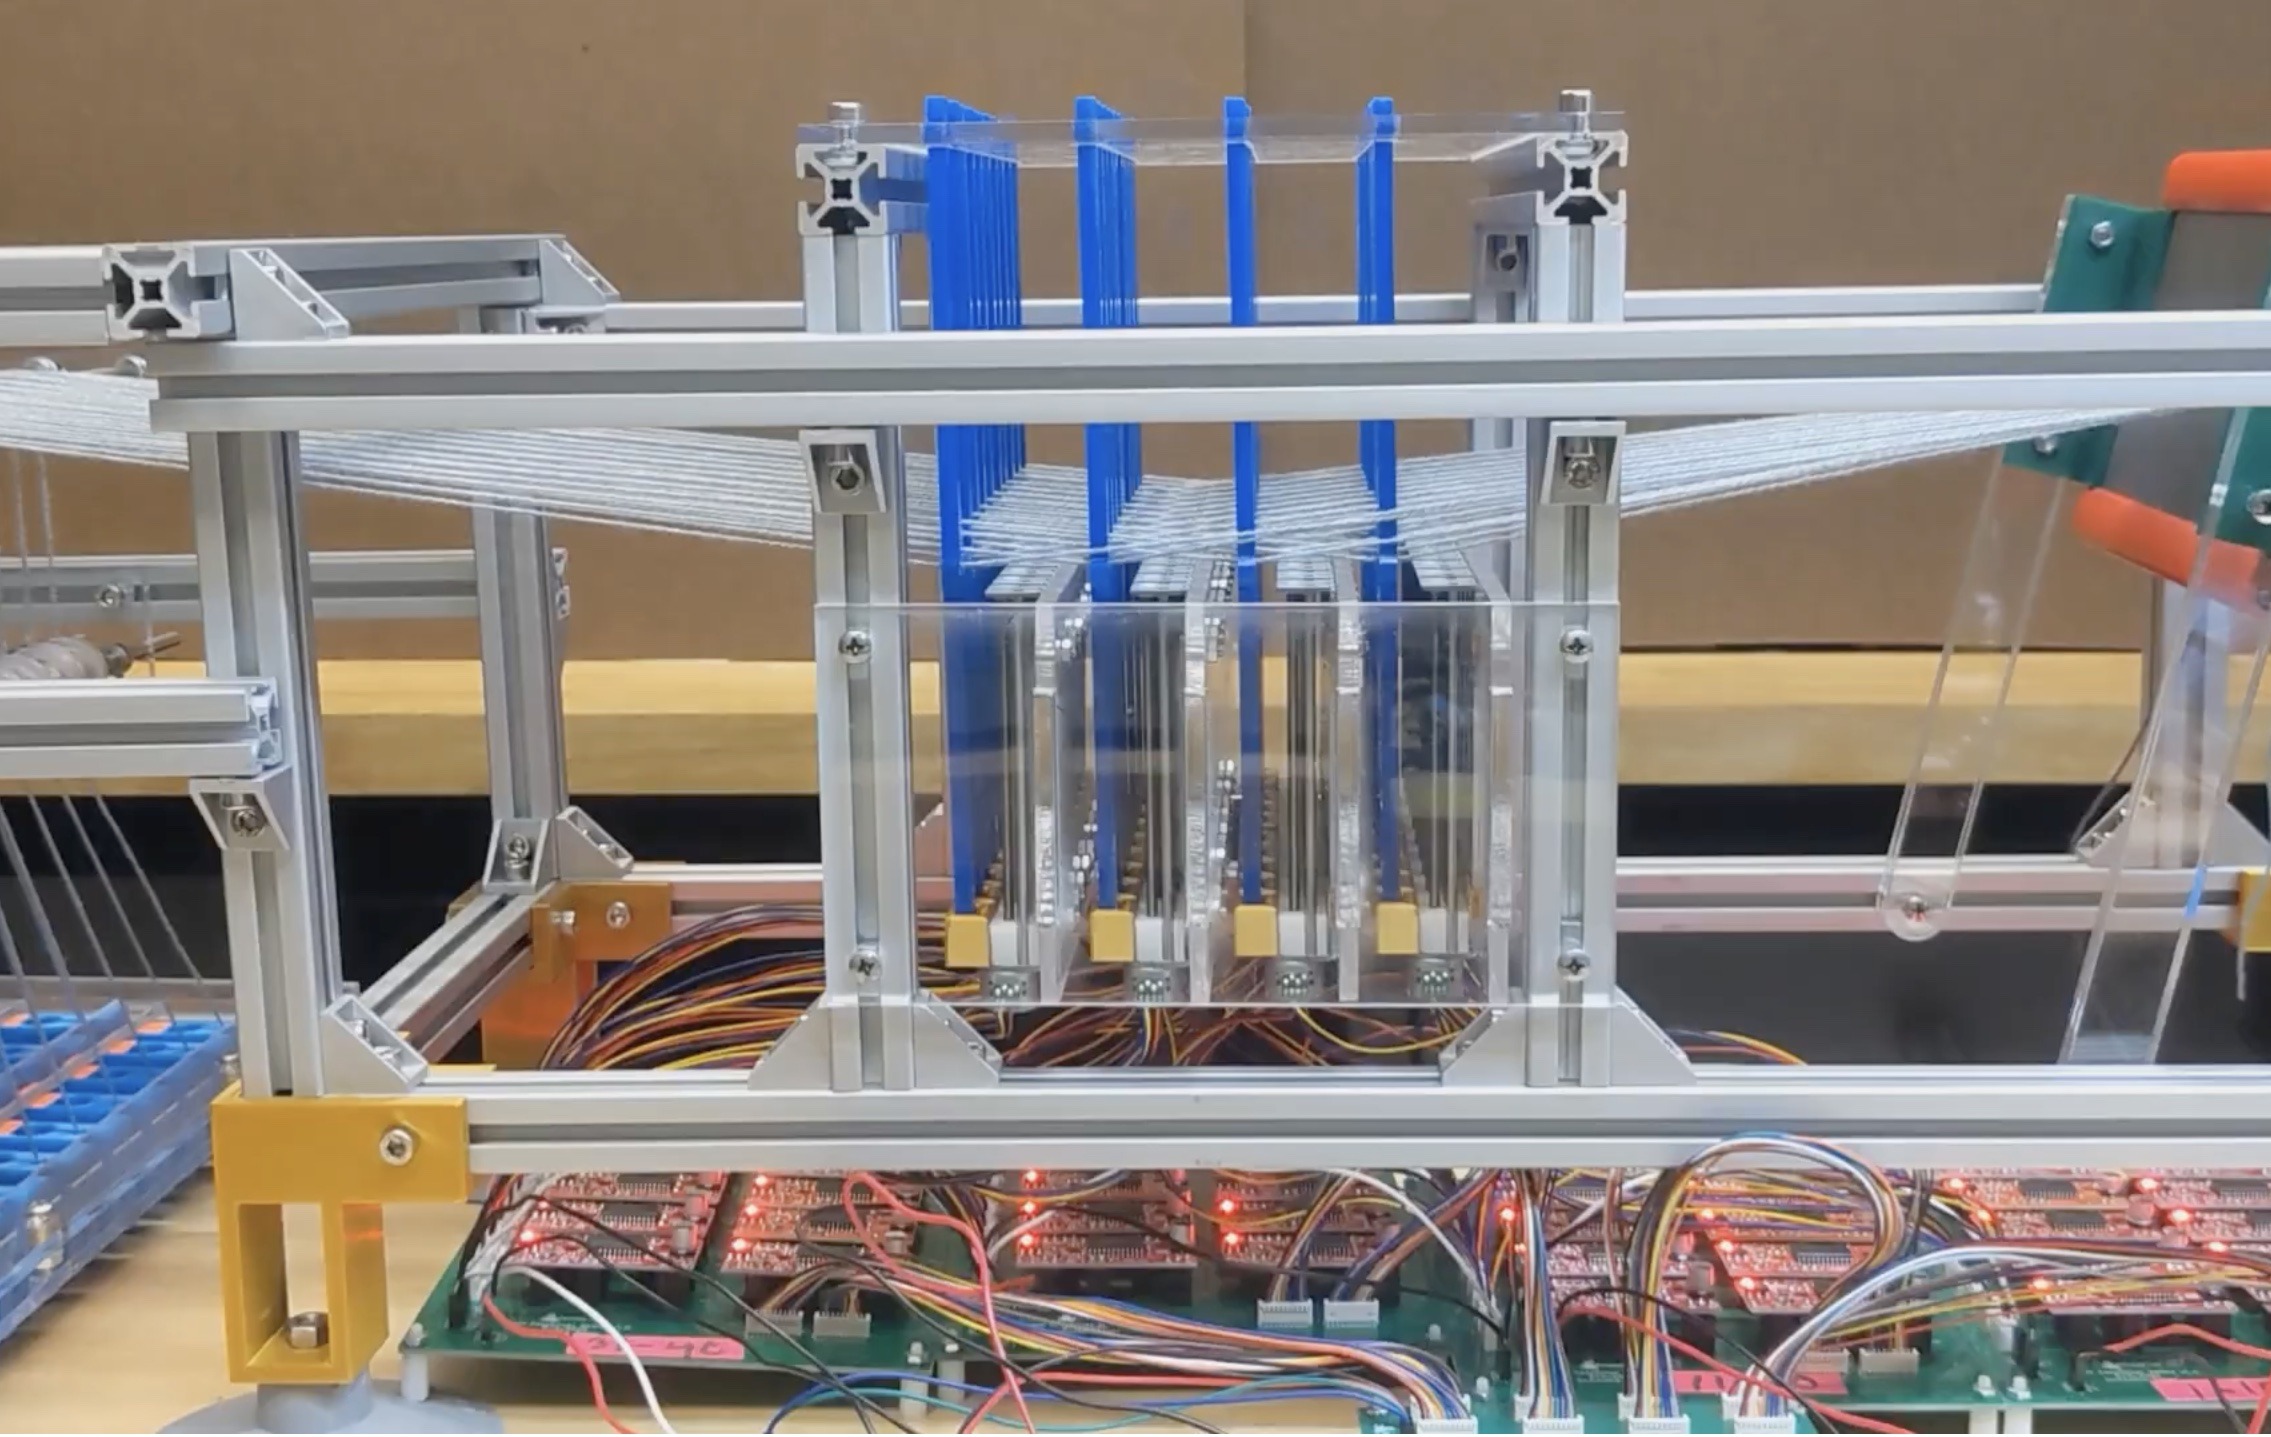 Open-source loom encourages interdisciplinary learning